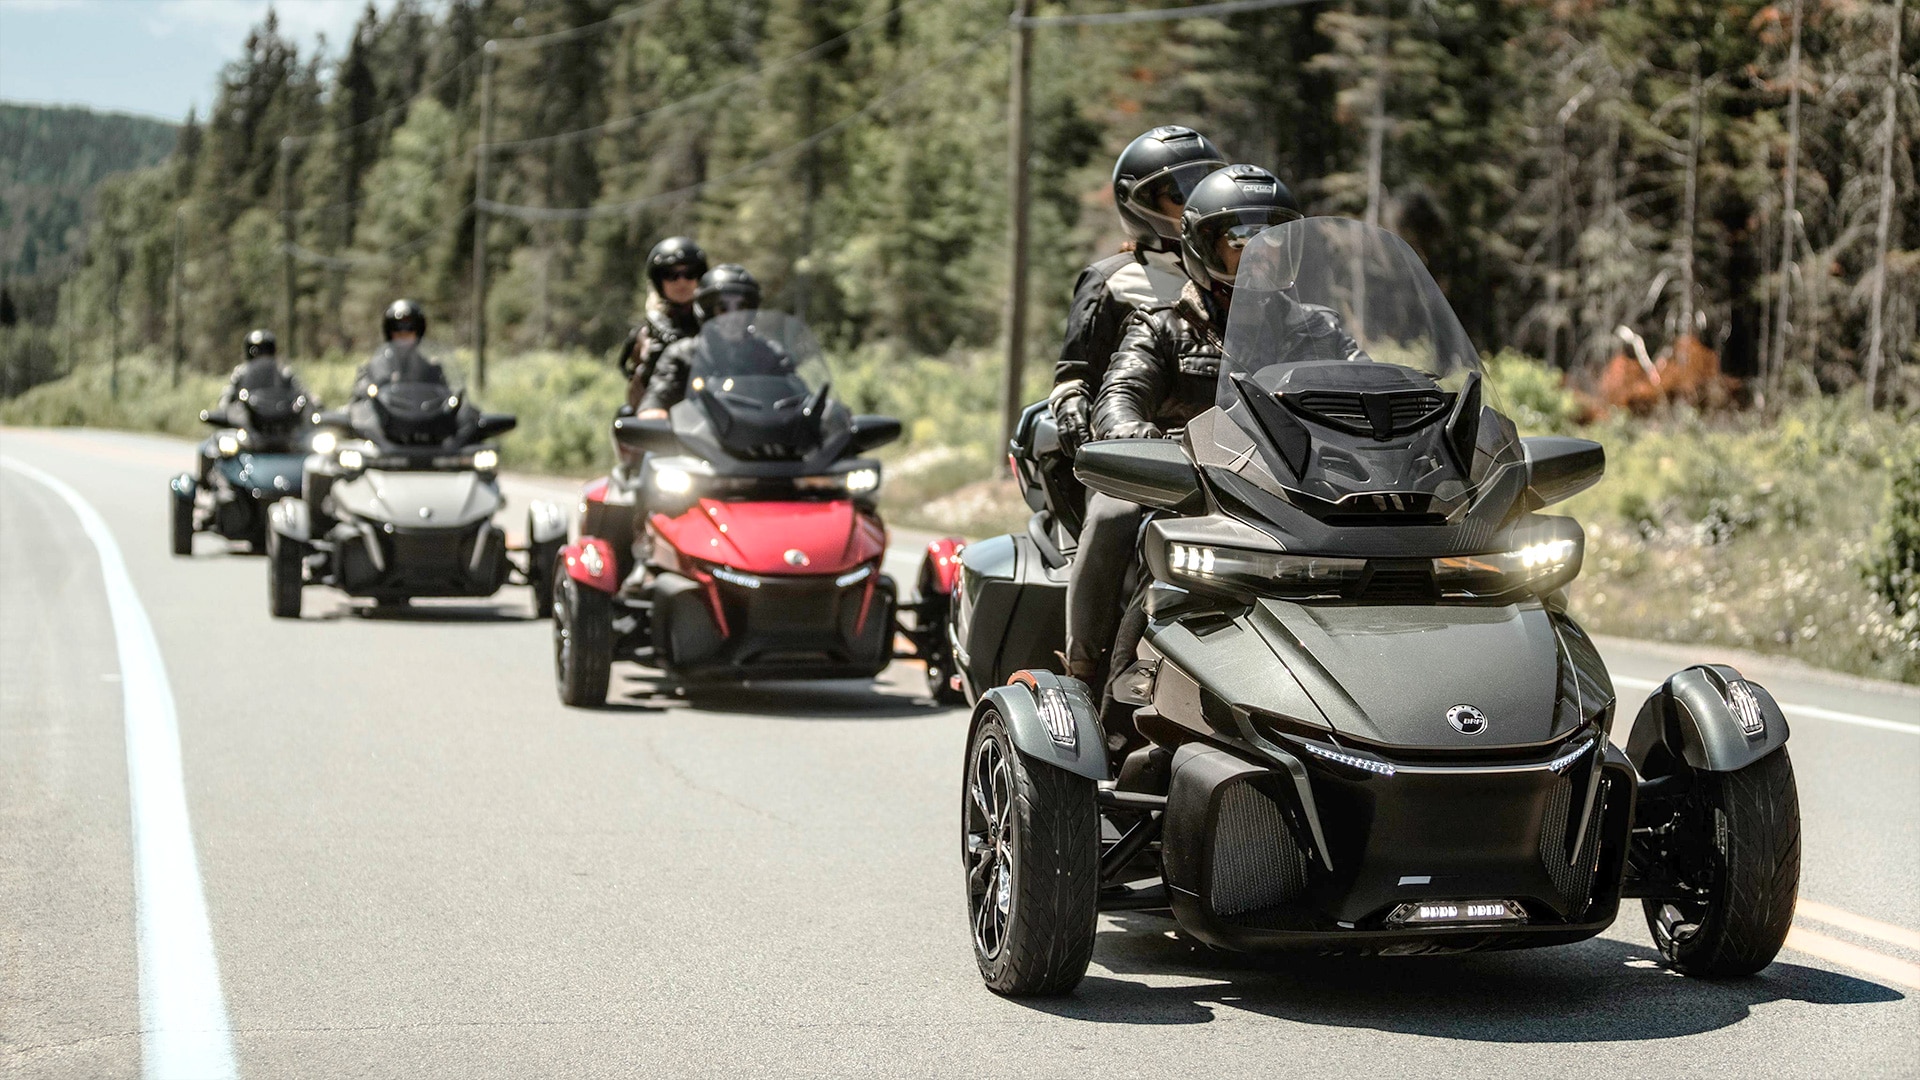 Riders with their Can-am three-wheel motorcycle